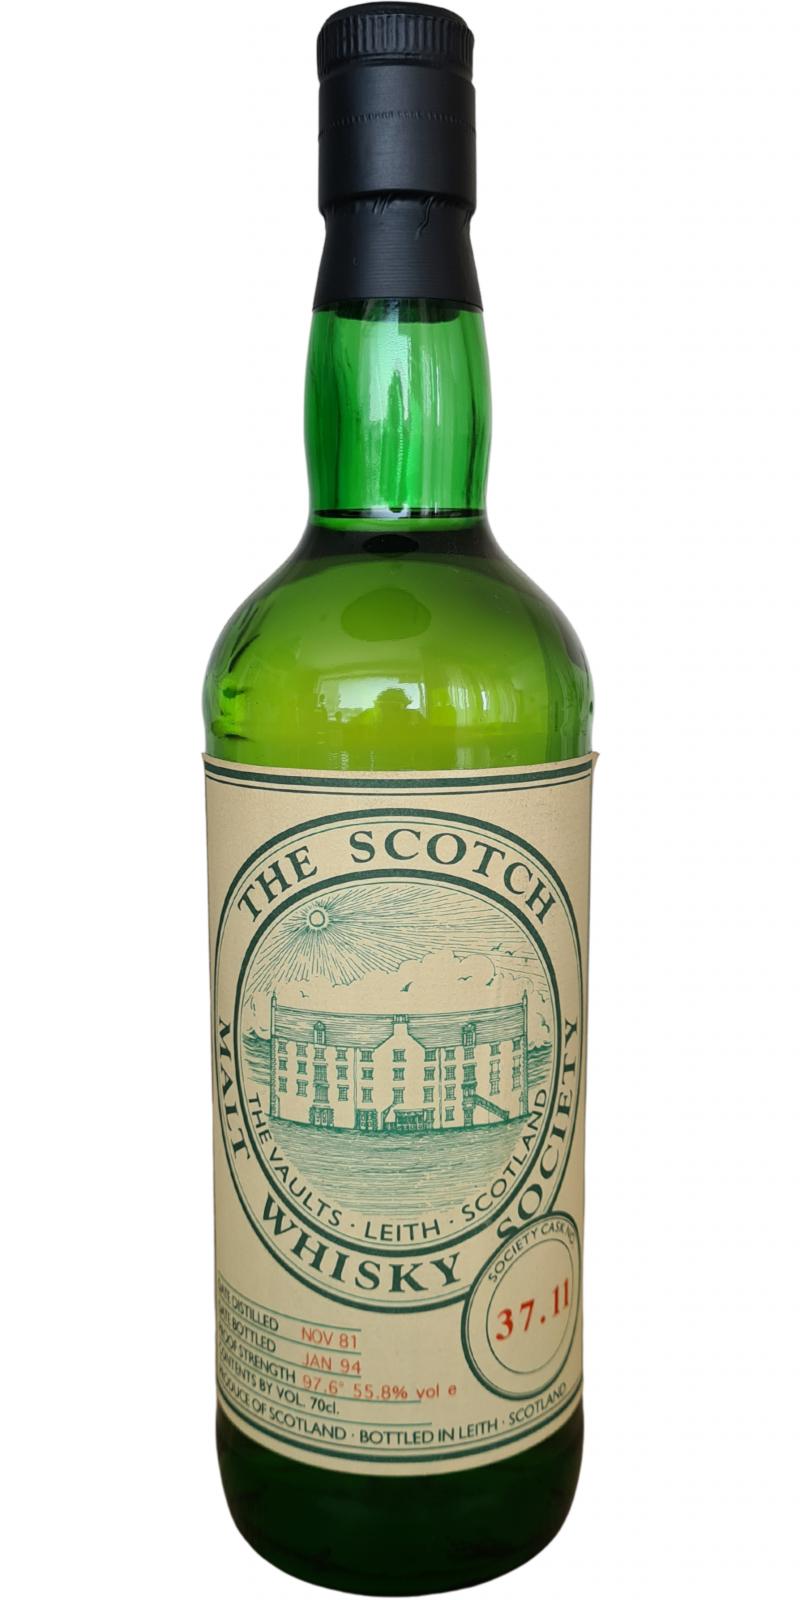 Cragganmore 1981 SMWS 37.11 55.8% 700ml